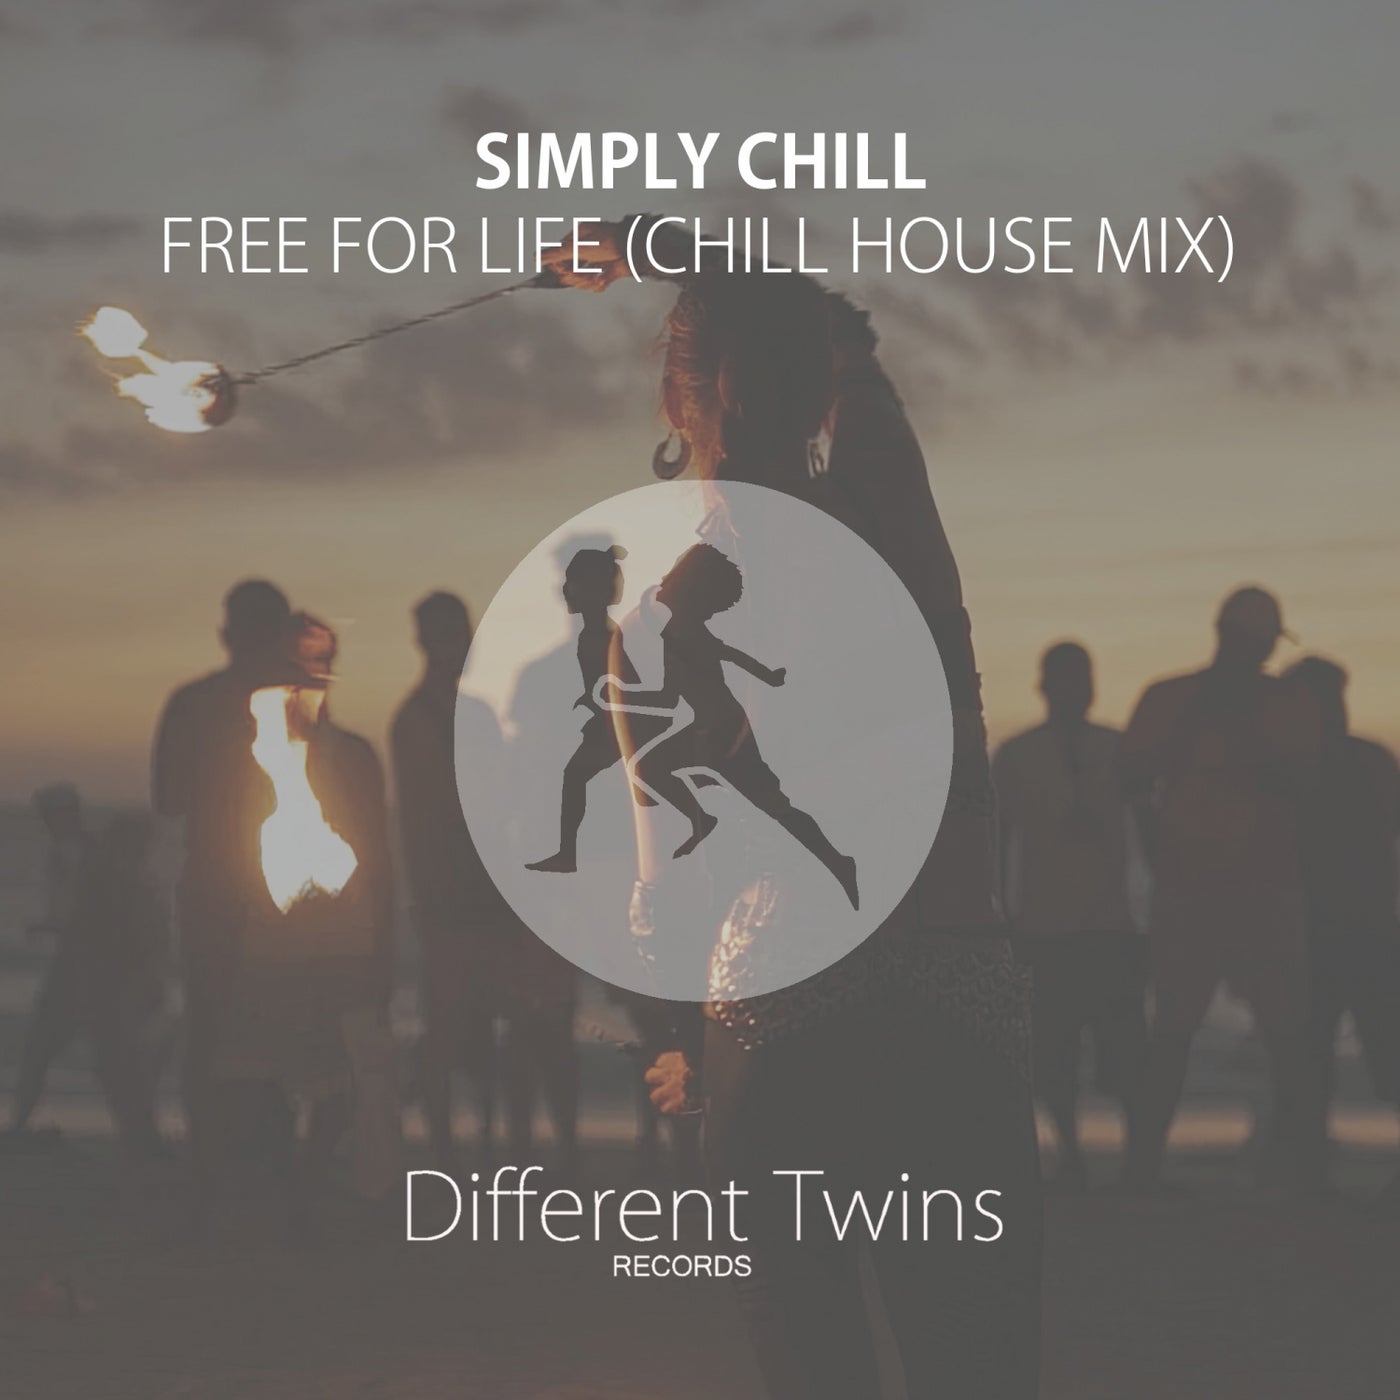 Free For Life (Chill House Mix)